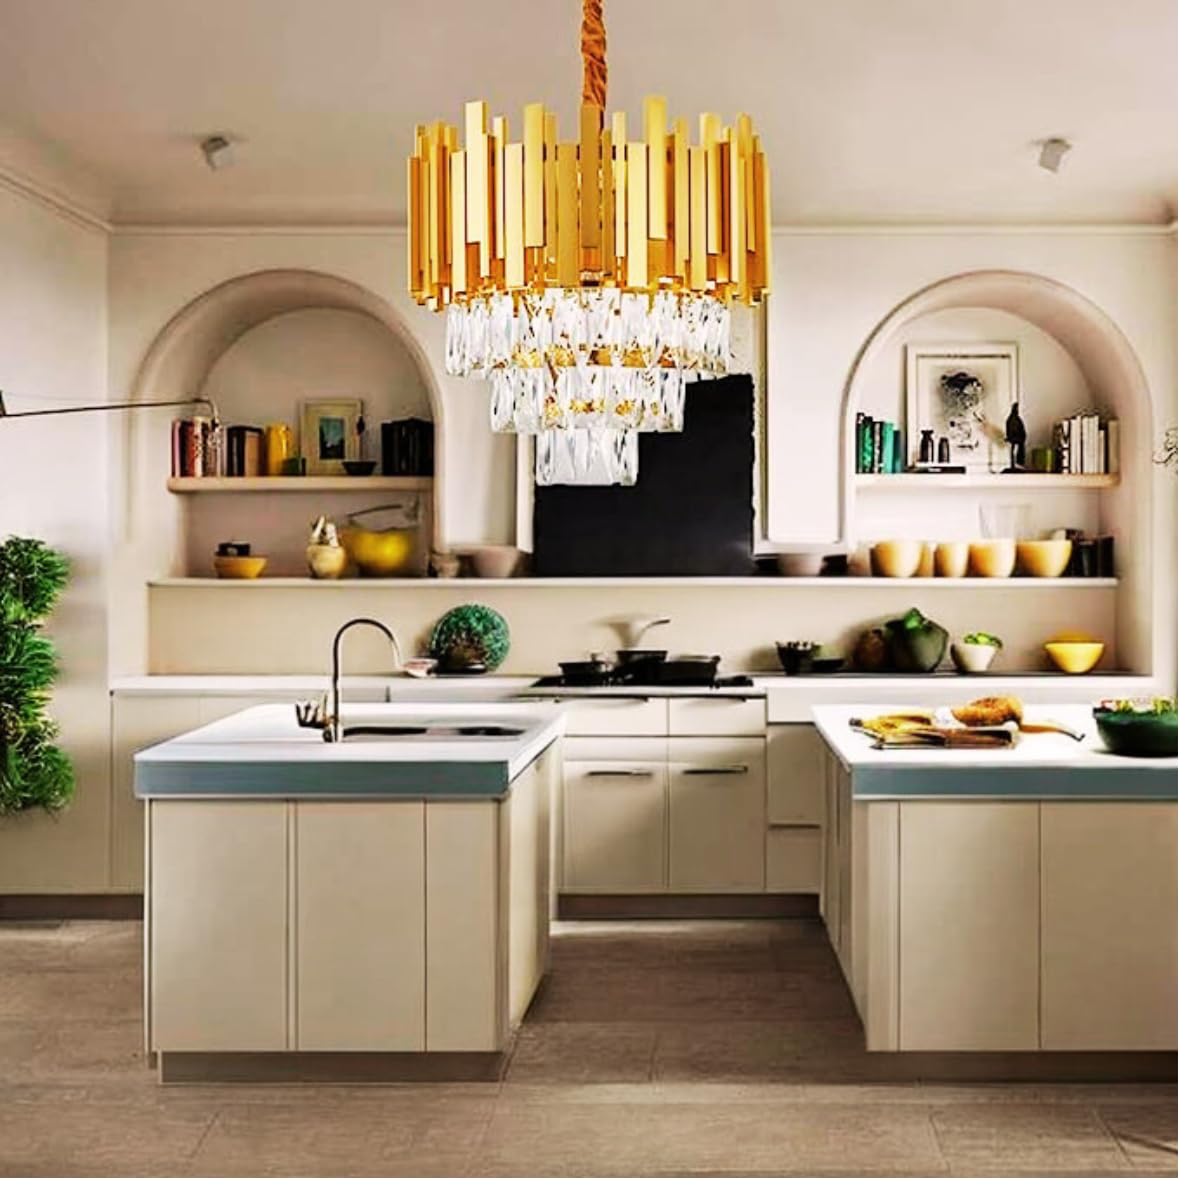 Hdc 400mm Golden Modern 3-Tier Crystal Chandelier - Luxury Ceiling Pendant Lighting Fixture with LED Plate